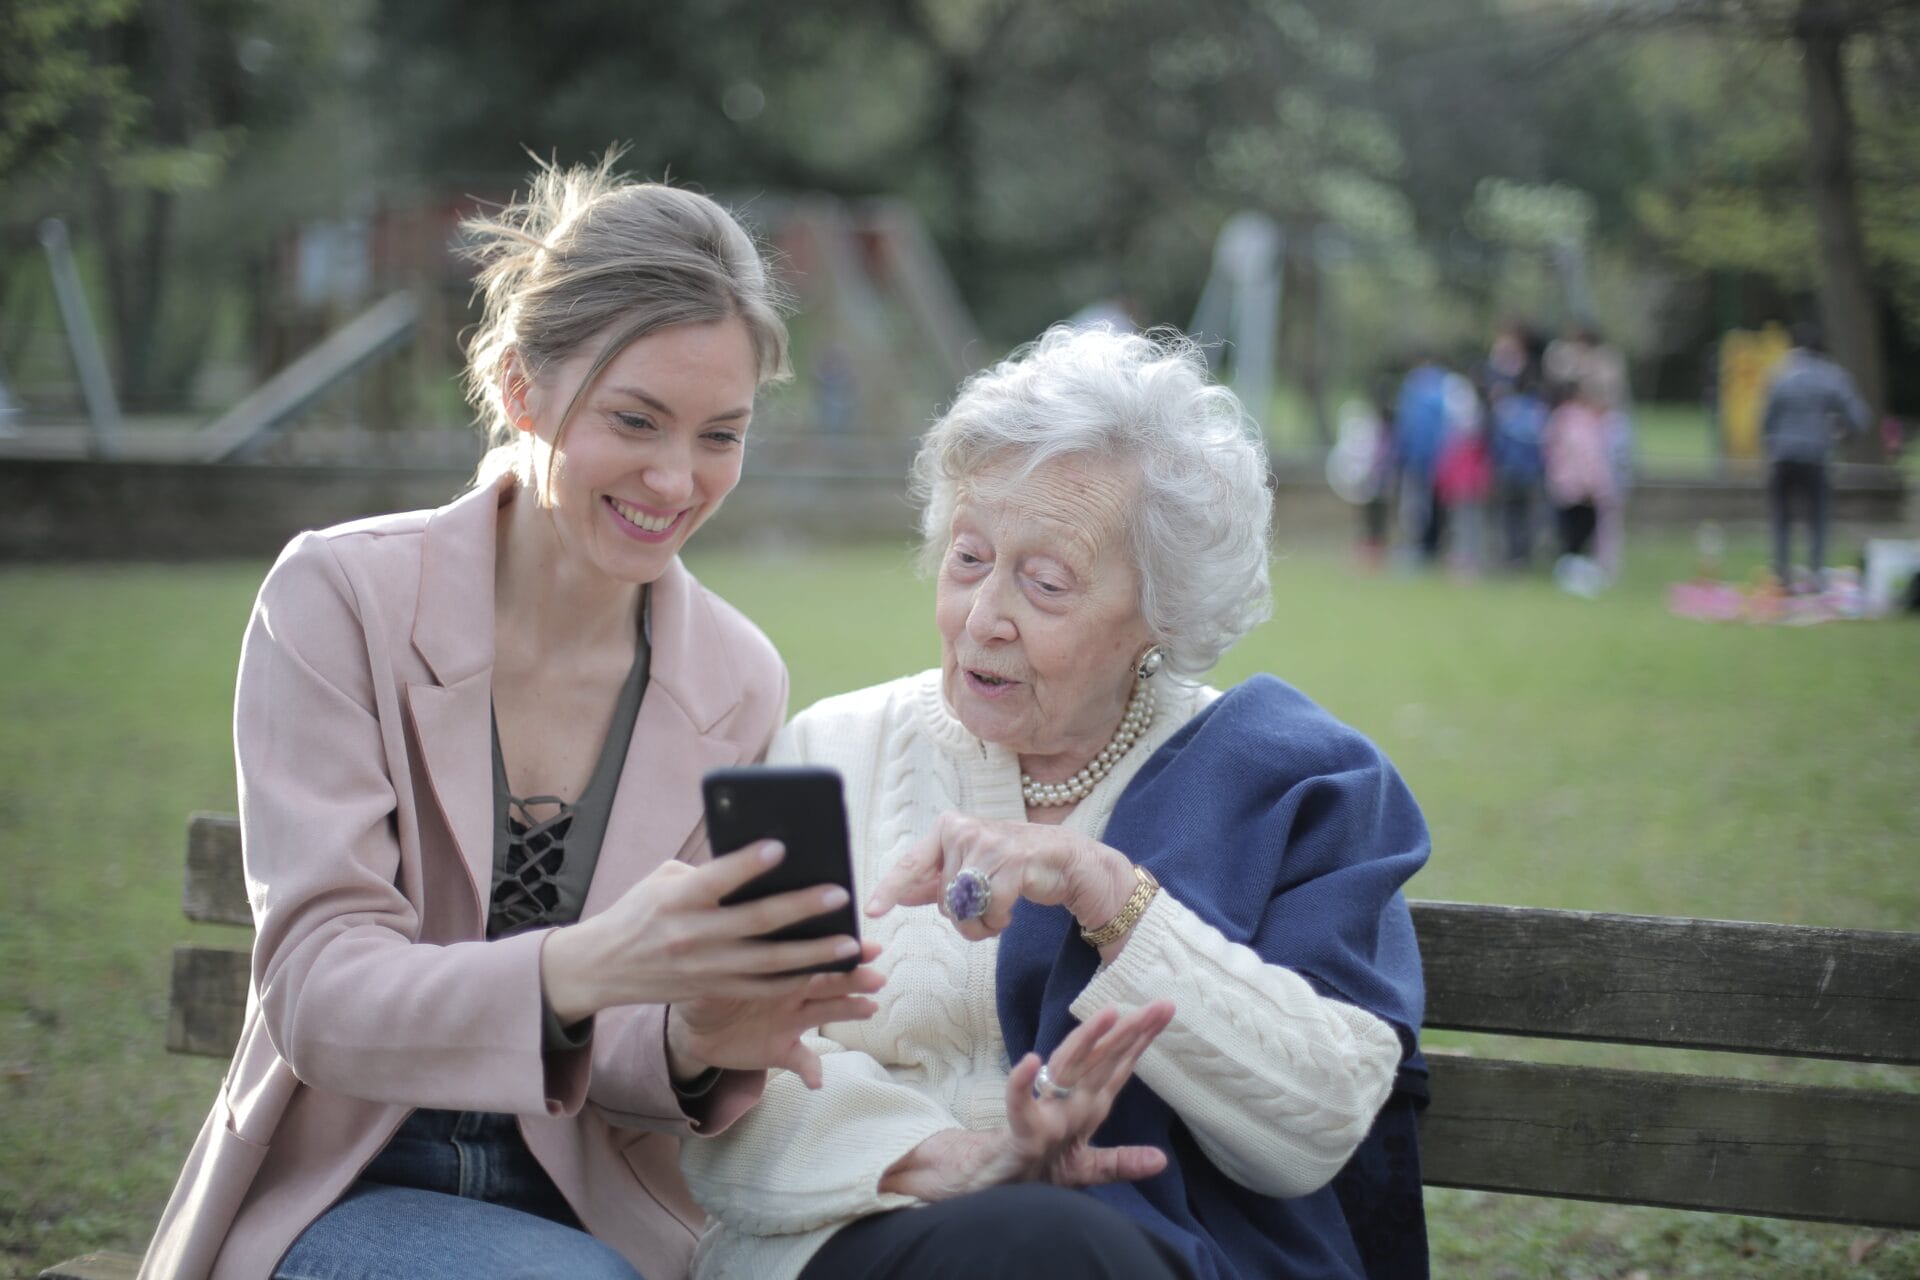 A younger person pointing to a cell phone with a senior citizen.